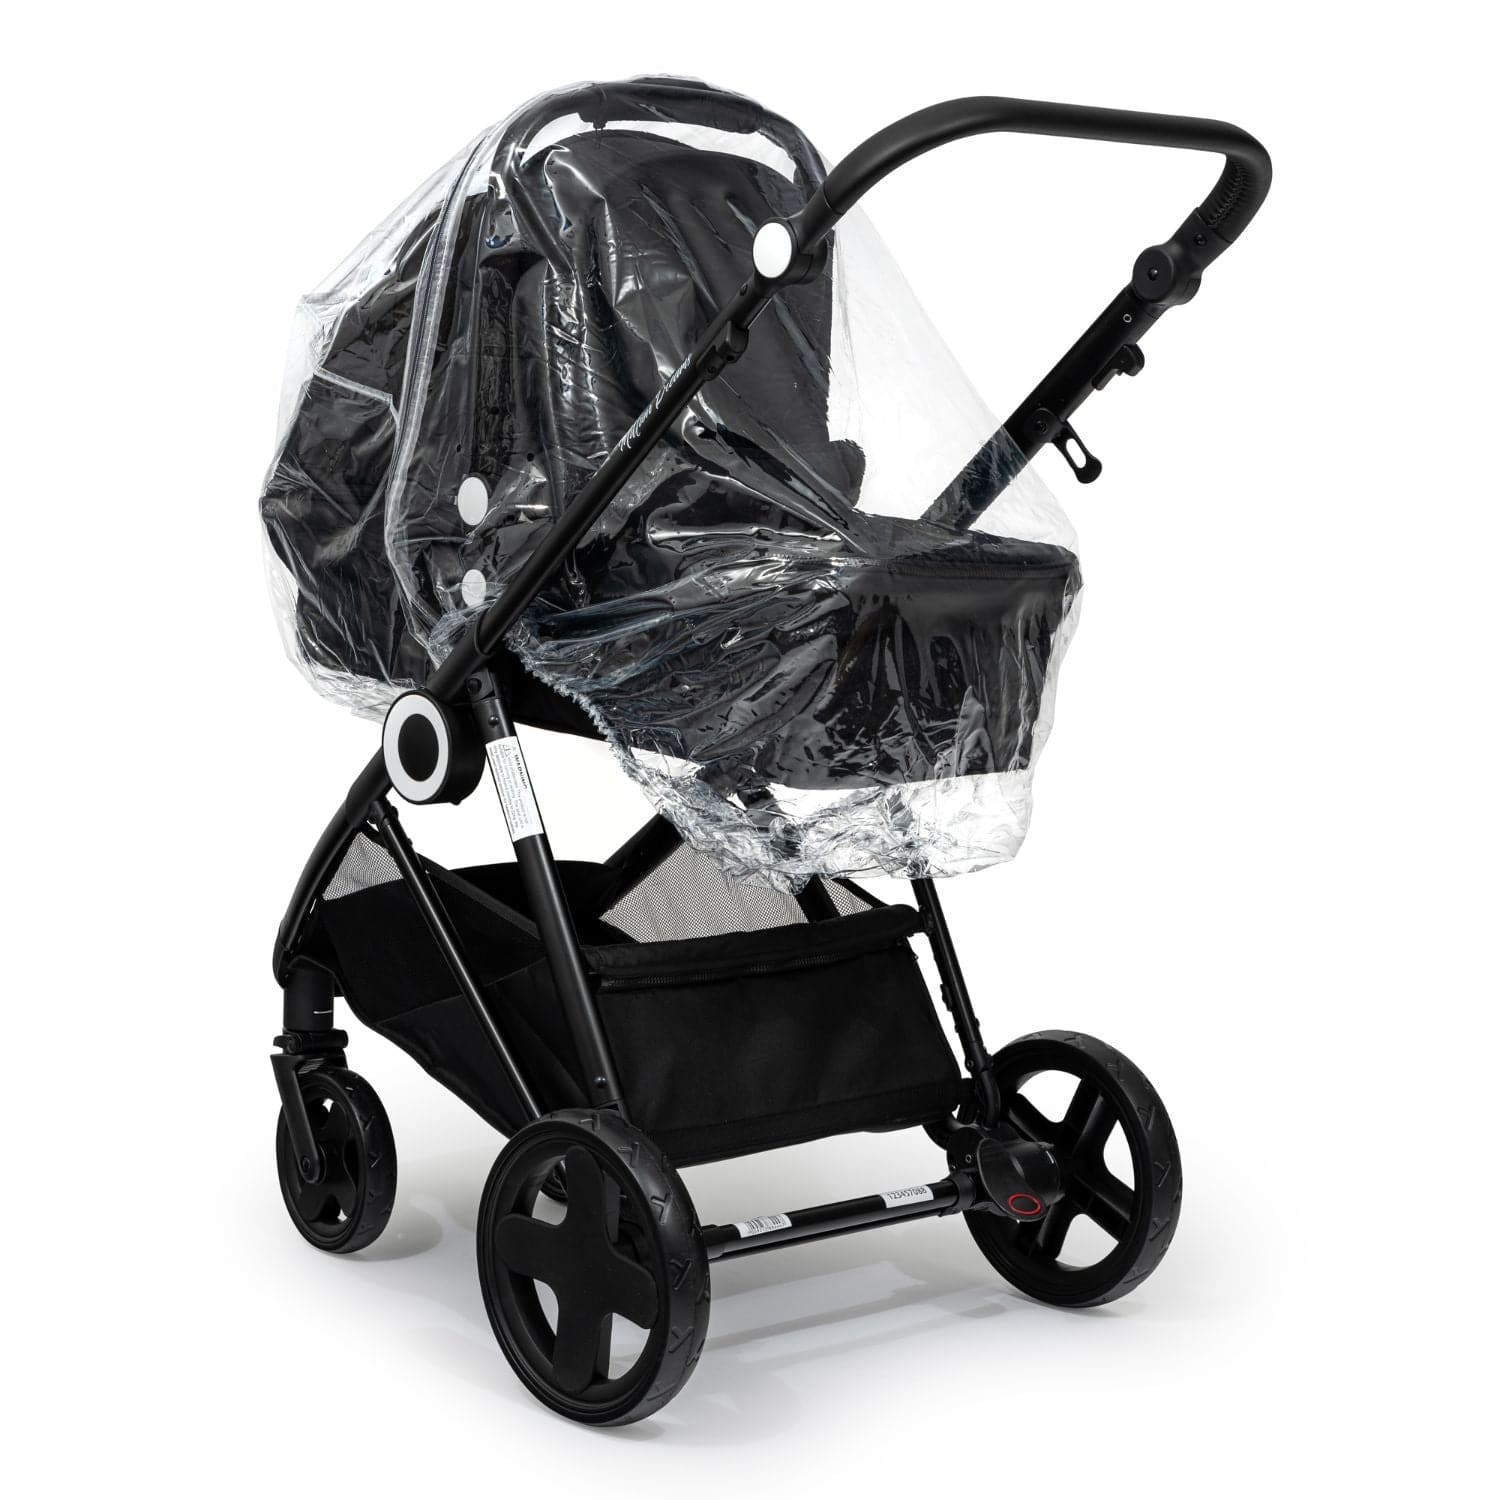 Carrycot Raincover Compatible With Babybus - Fits All Models - For Your Little One